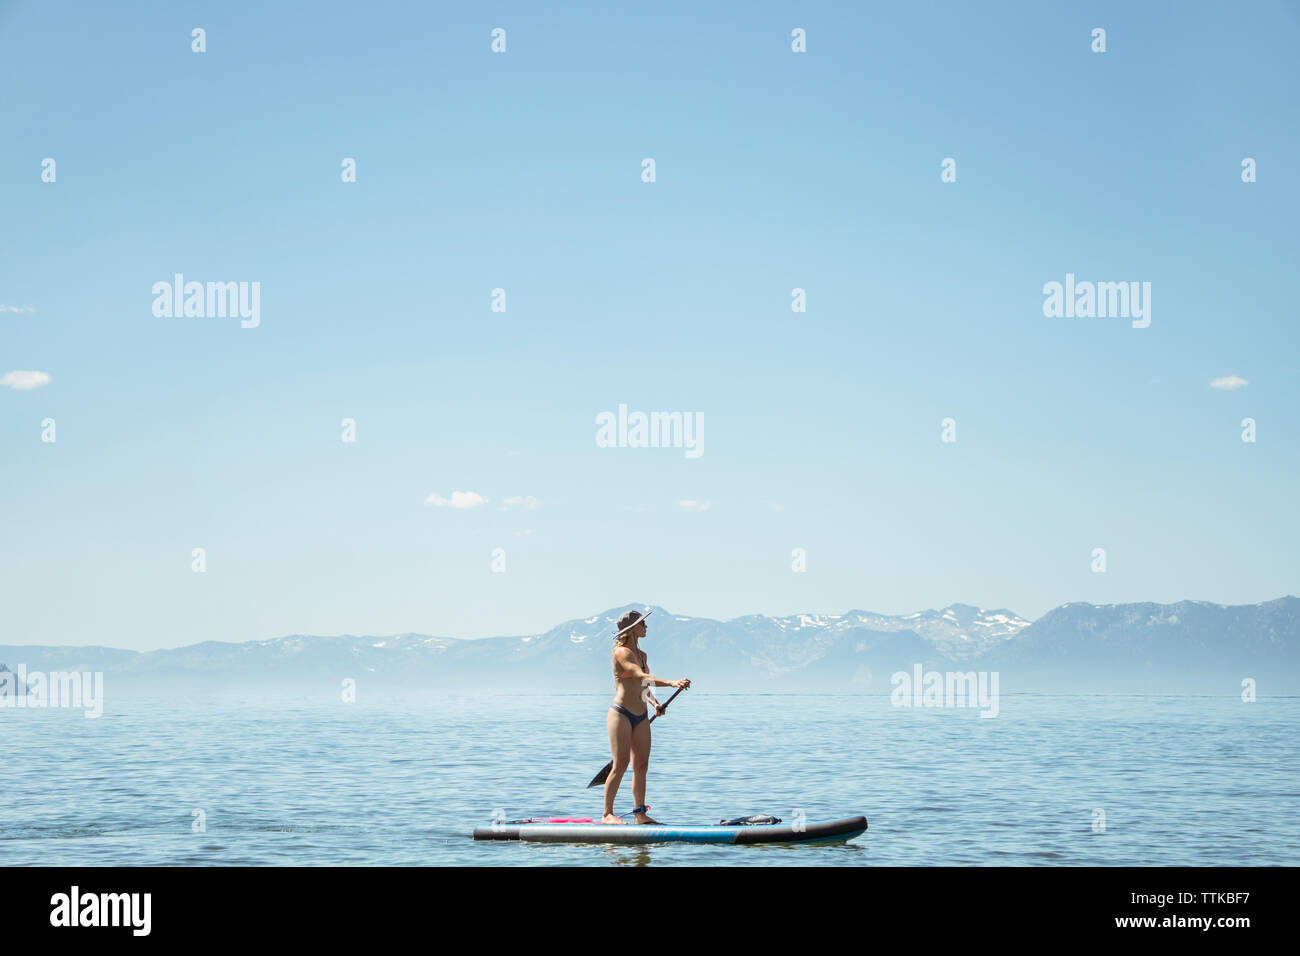 Side view of woman in bikini paddleboarding on lake against blue sky during sunny day Stock Photo